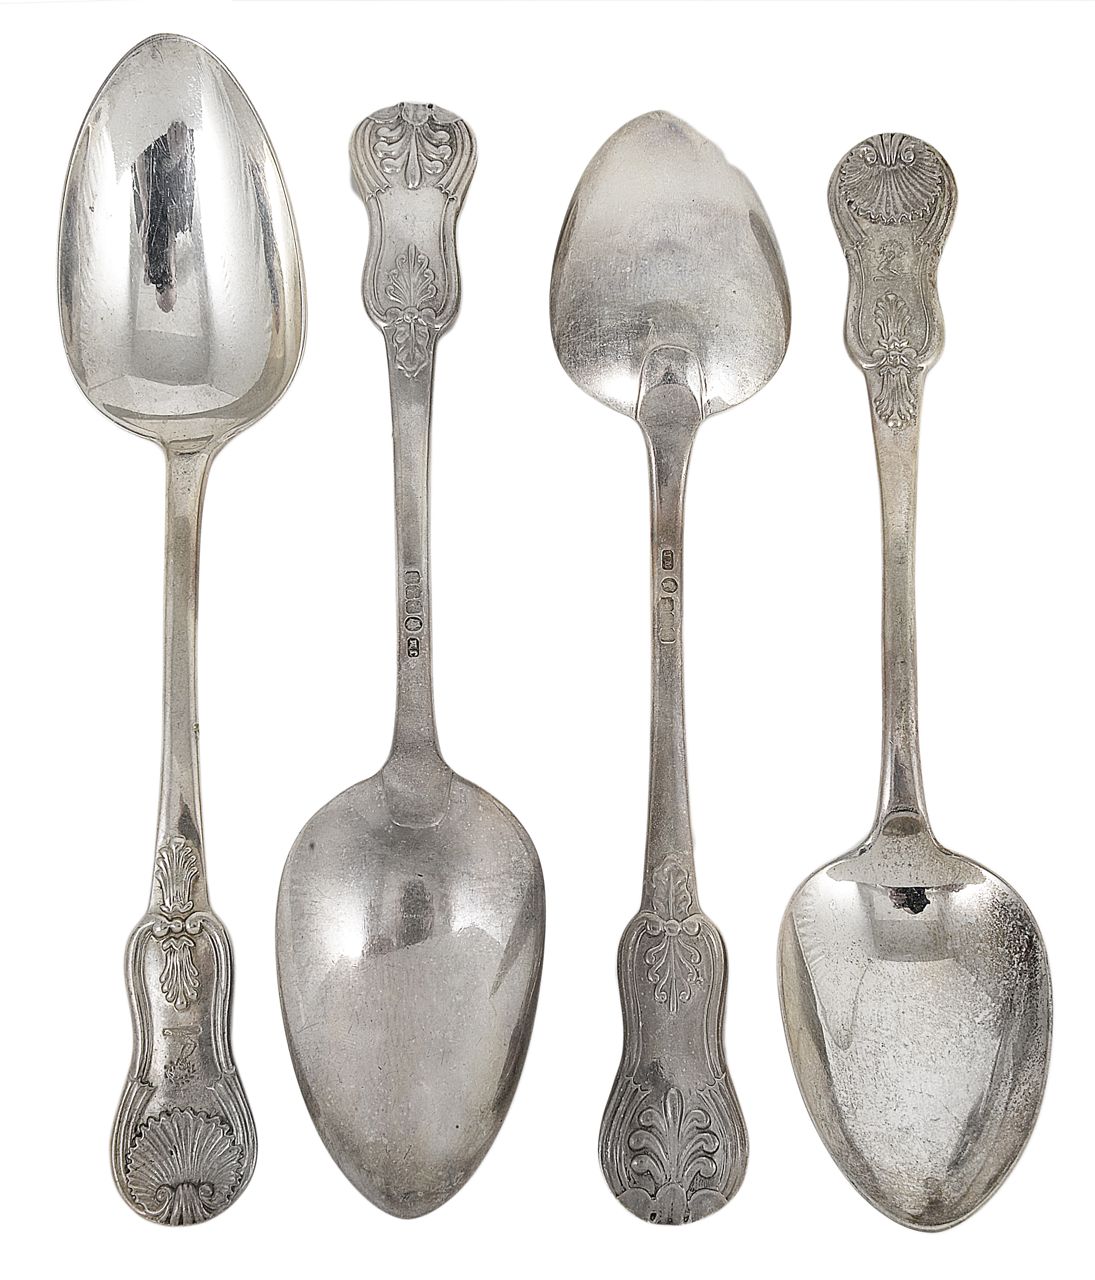 Twelve silver serving spoons, hallmarked Glasgow 1862, with makers initials JM, weight 50 ozt